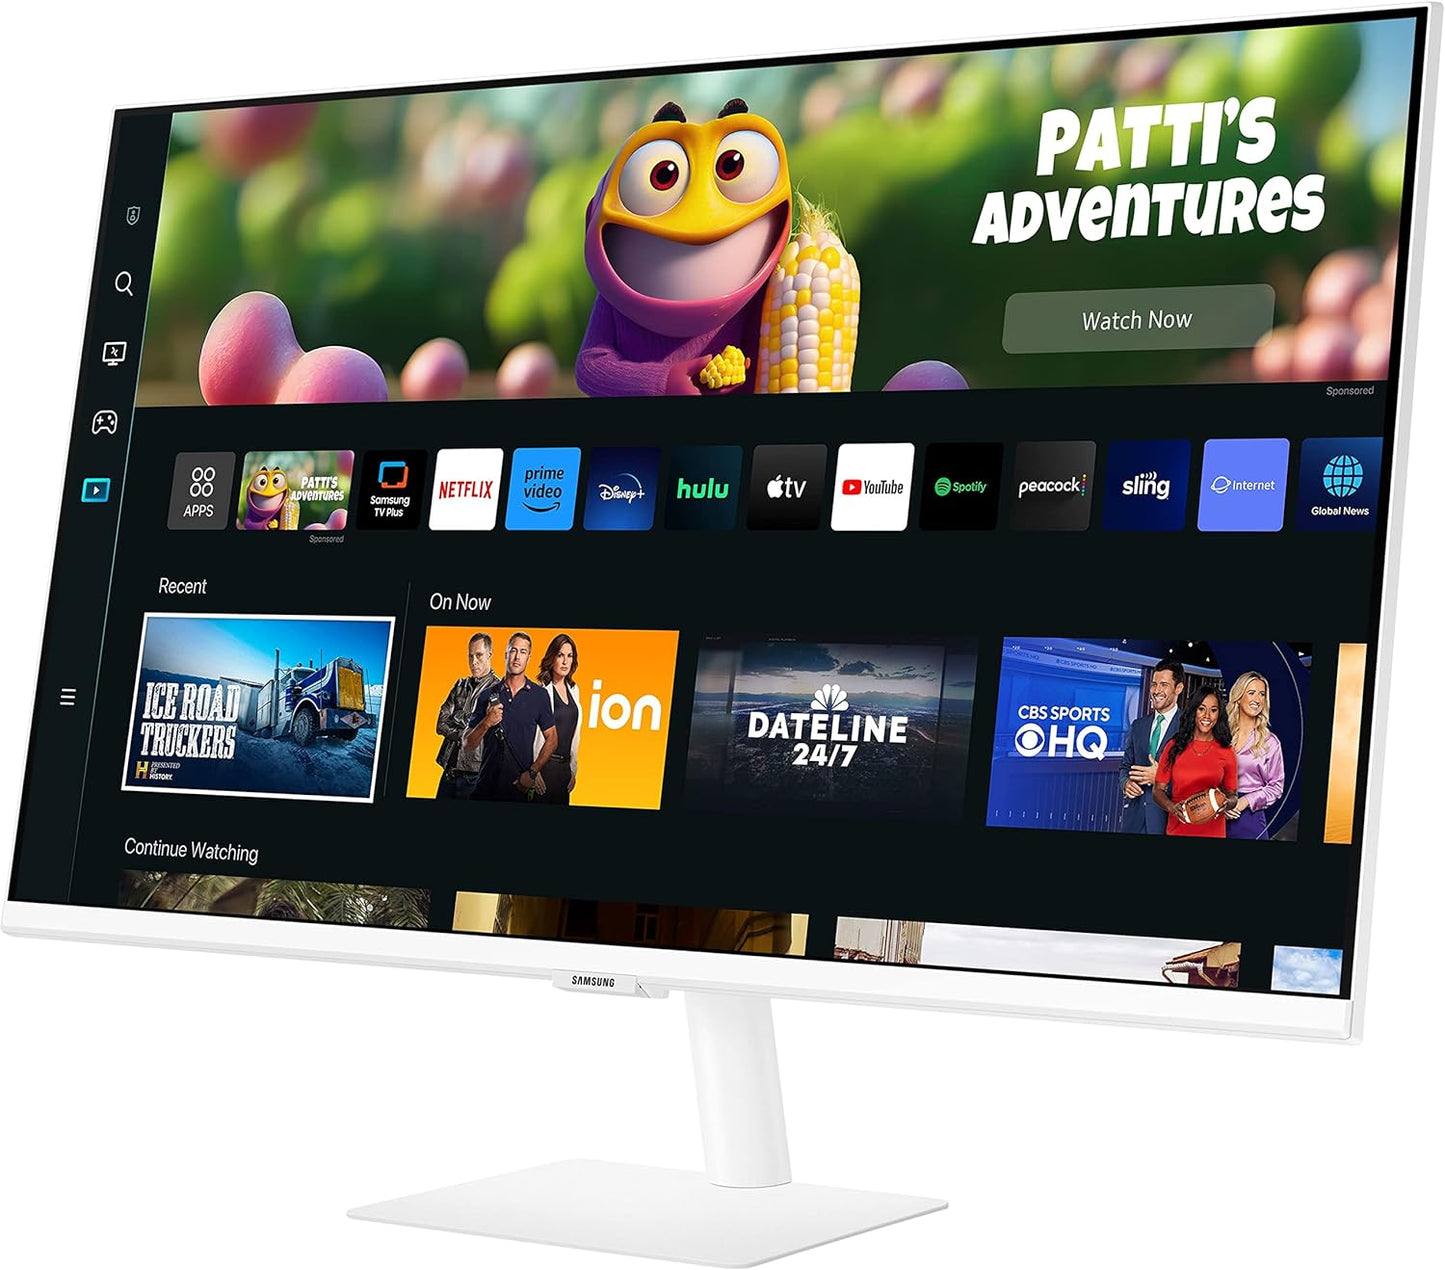 Samsung 32" Smart Monitor with 1 Billion Color & HDR10